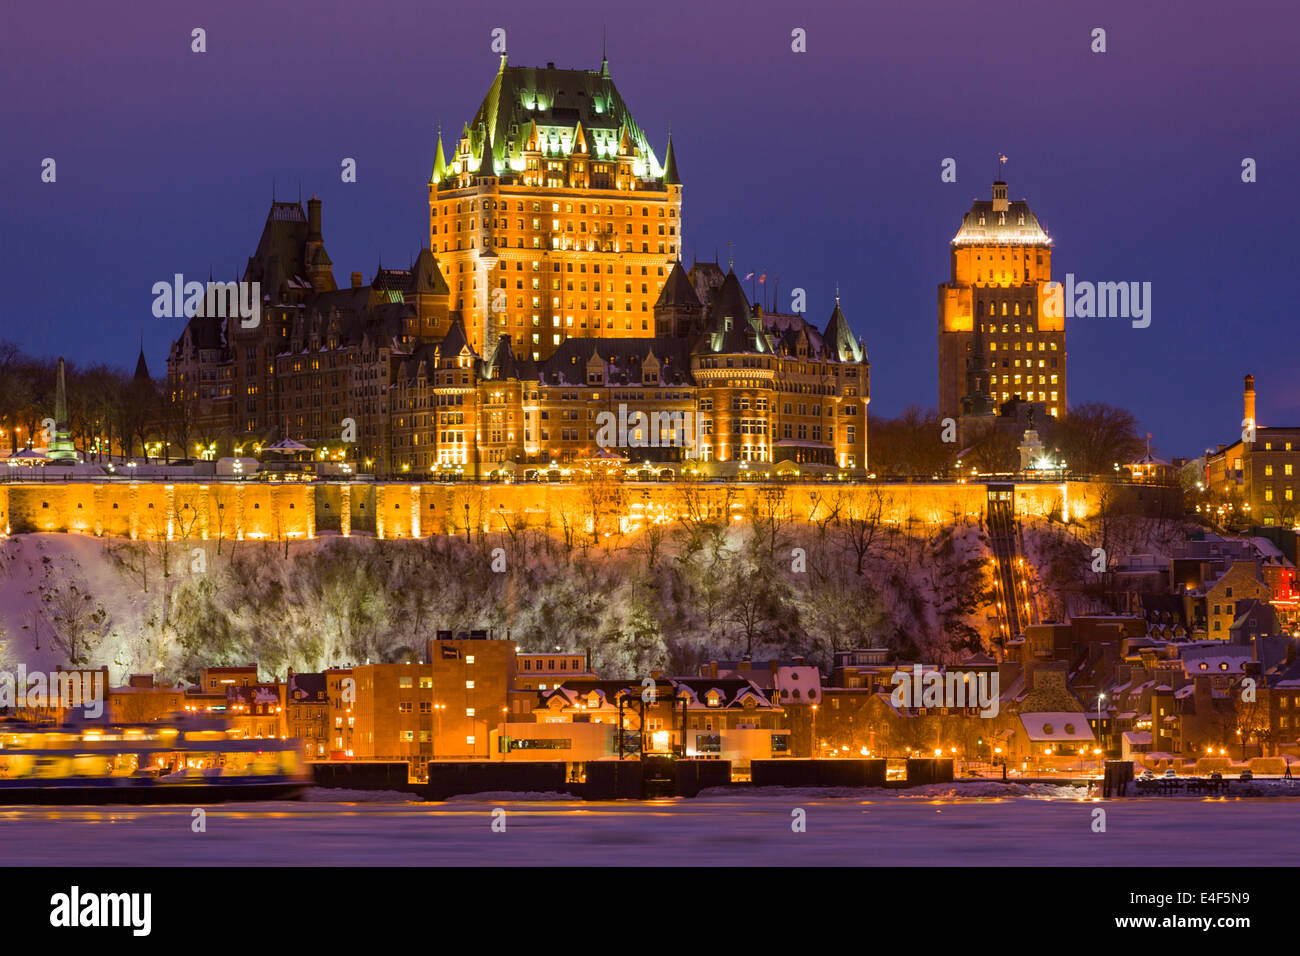 City skyline at twilight, showing Chateau Frontenac in winter, as seen from across the Saint Lawrence River, Quebec City Quebec, Stock Photo